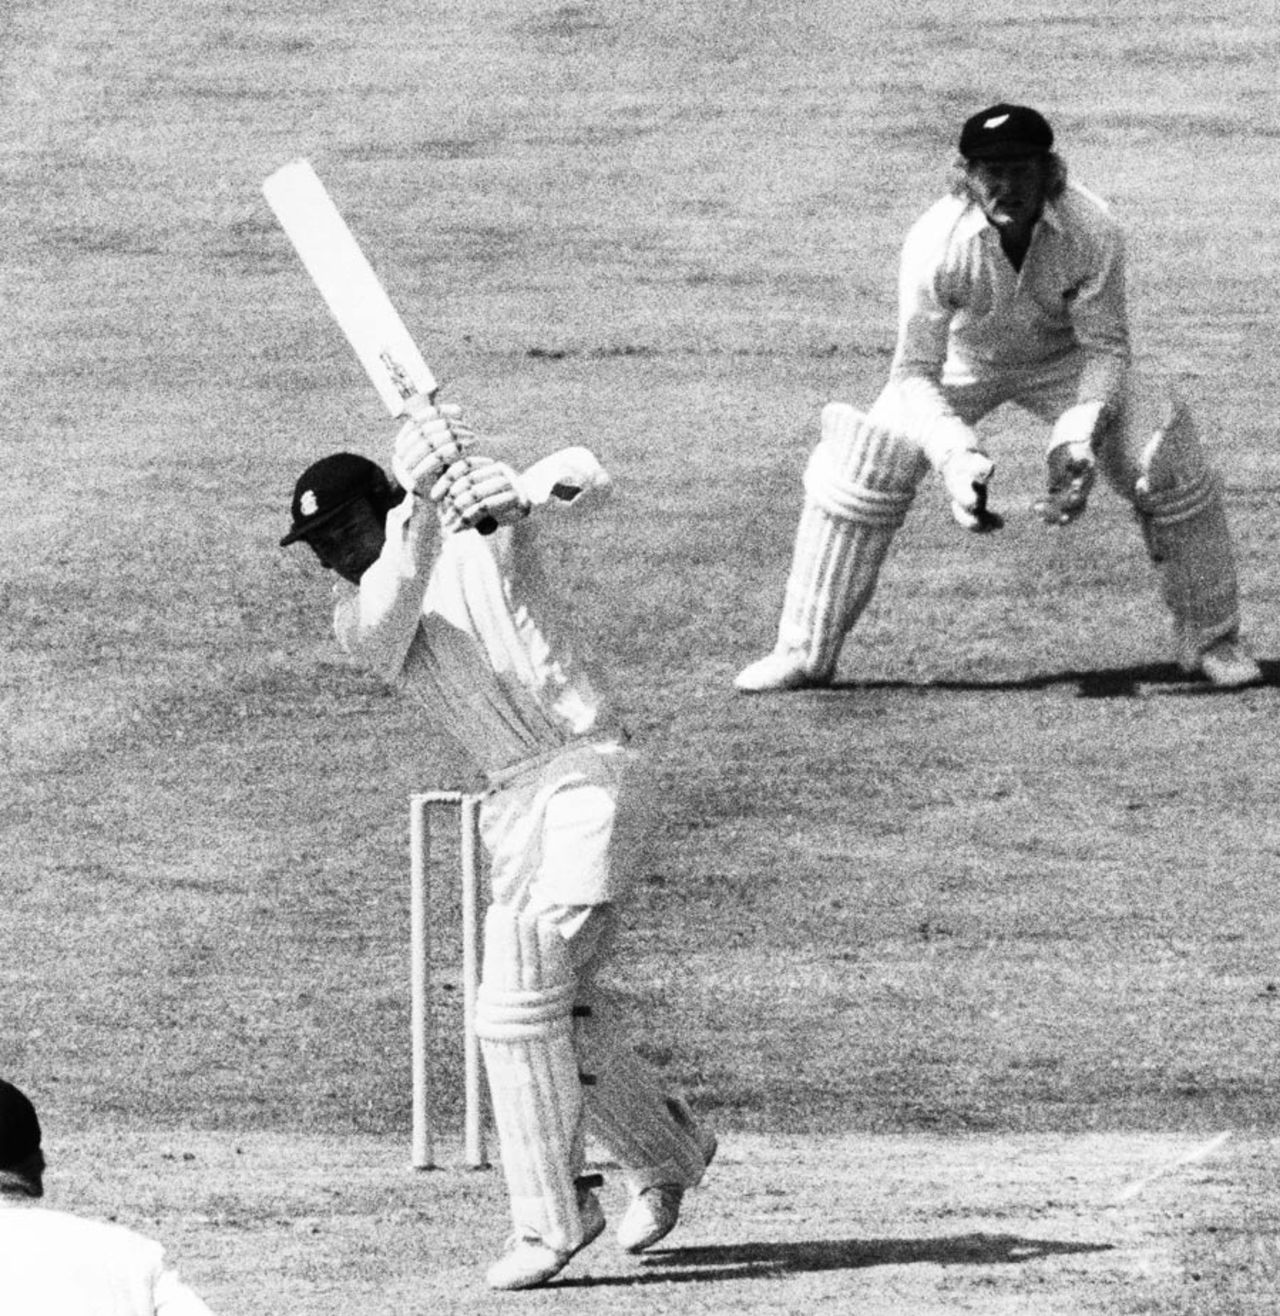 Keith Fletcher drives the ball, England v New Zealand, Lord's, World Cup, June 11, 1975